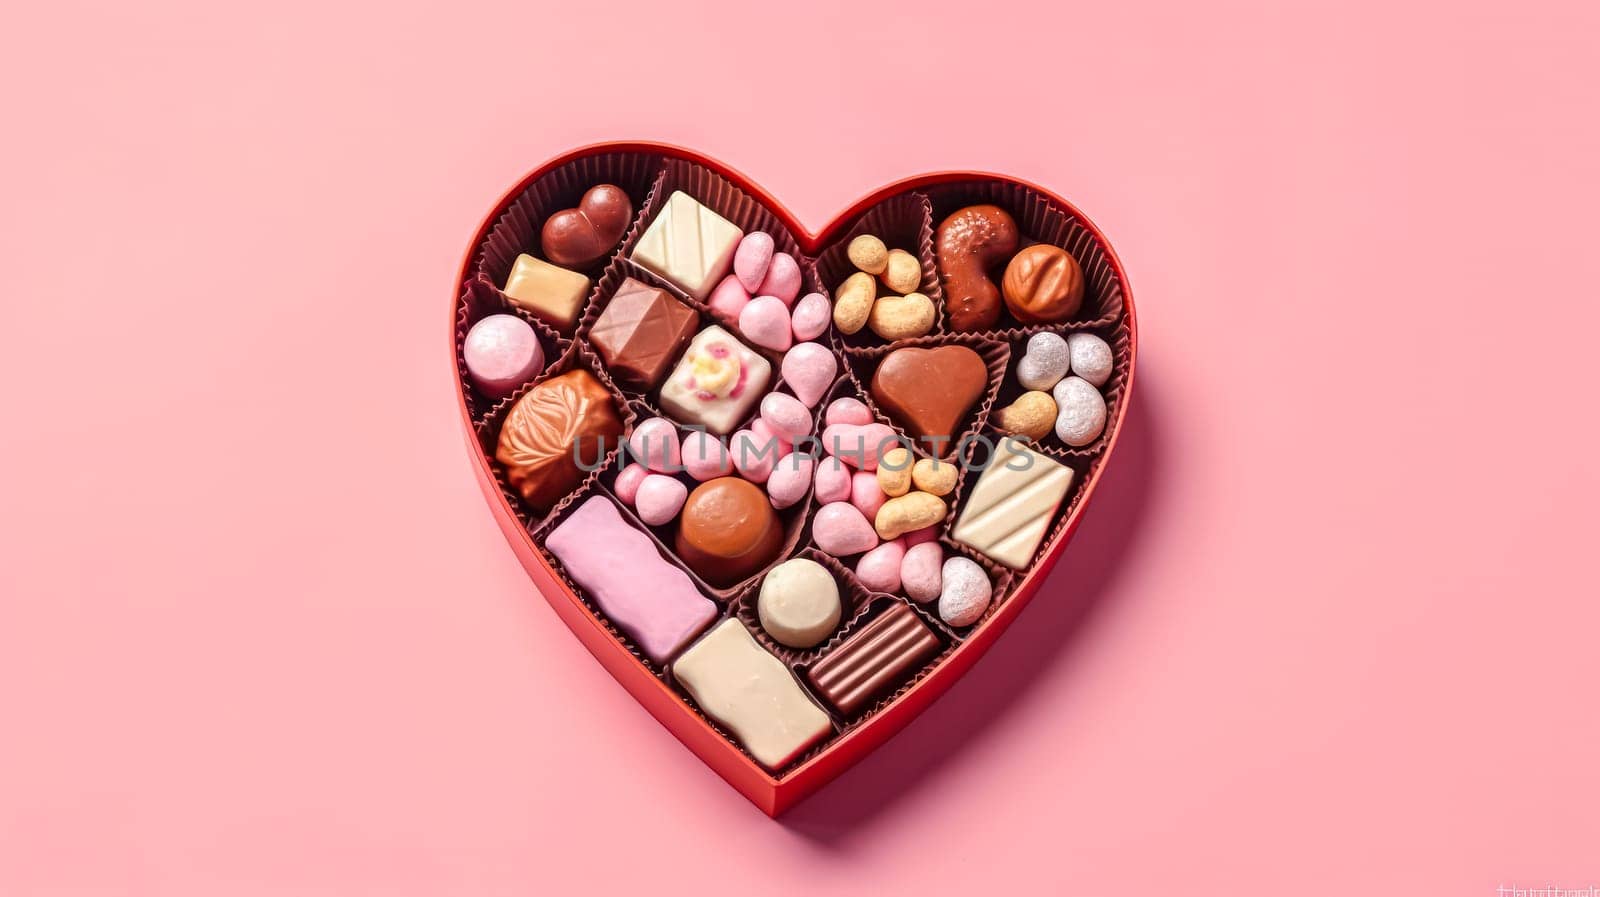 Delight your senses with heart shaped candies in a charming box on a pink background by Alla_Morozova93